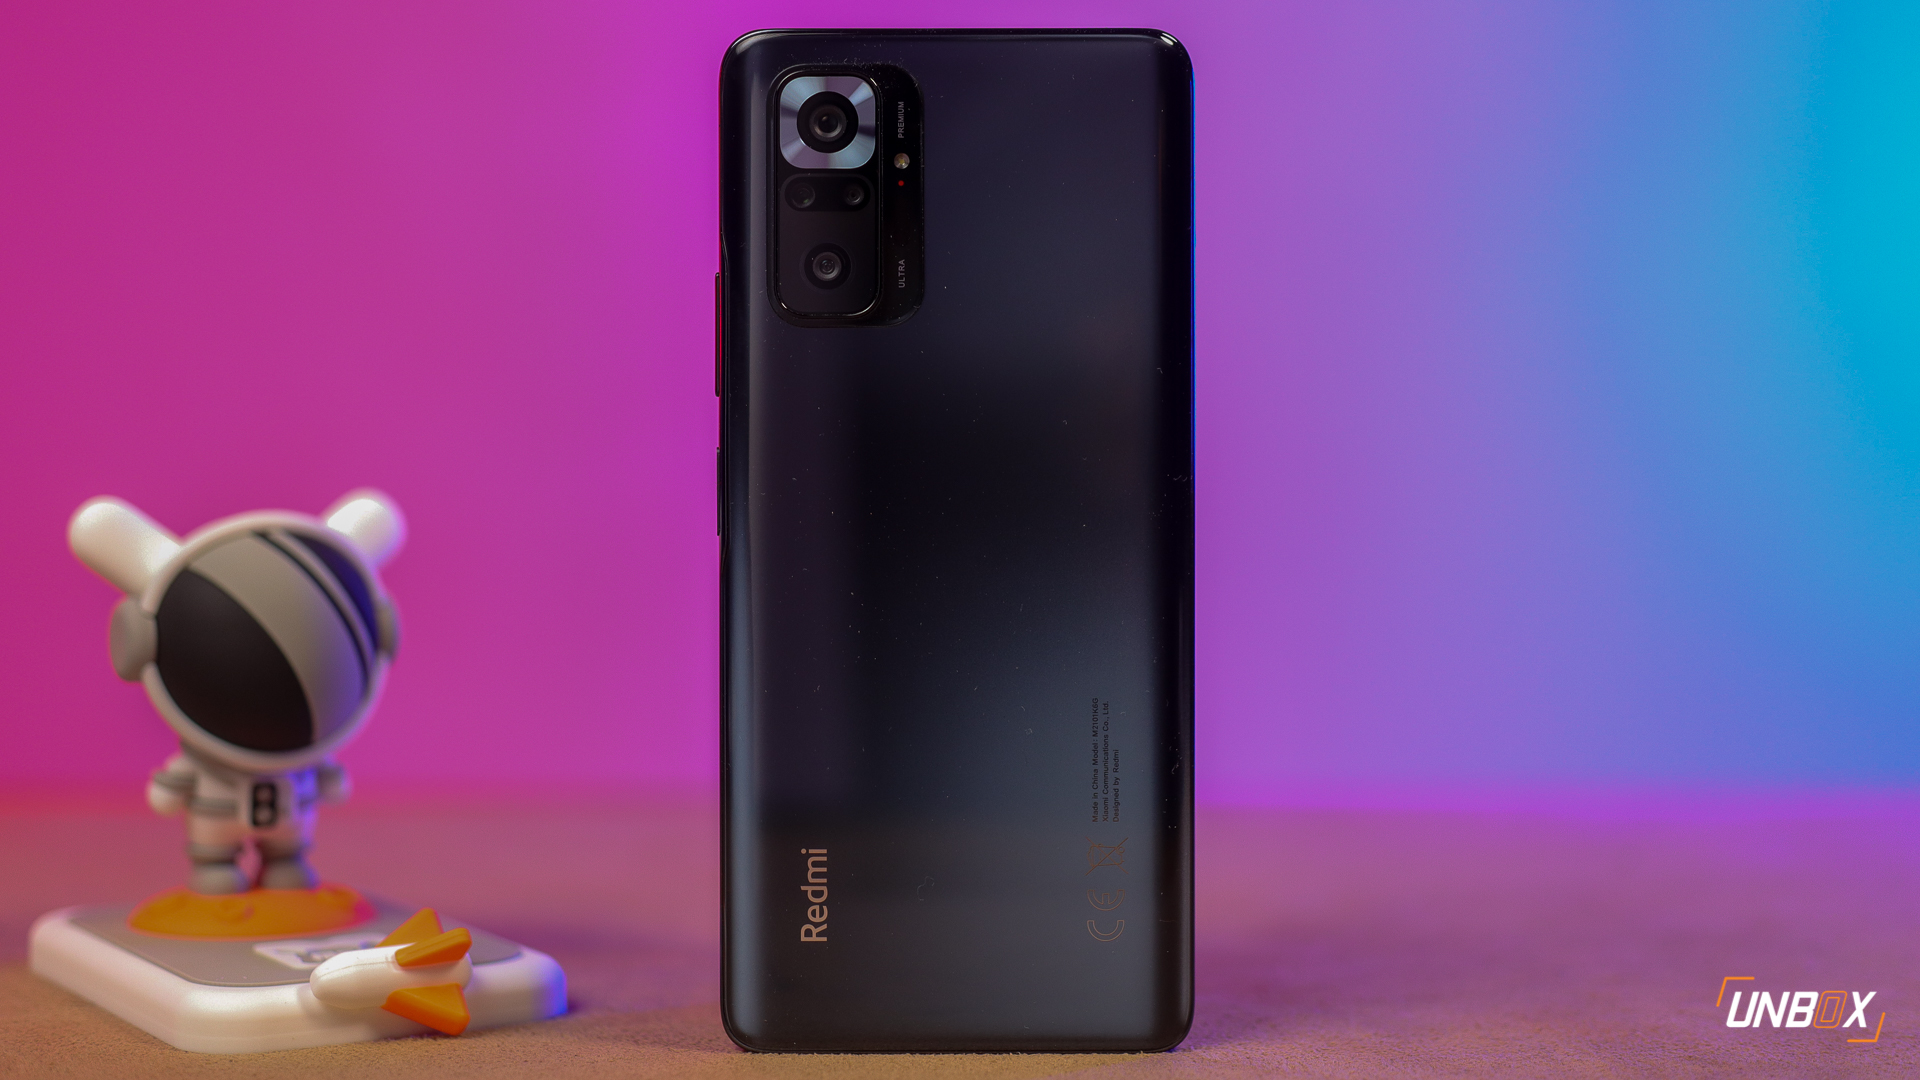 Redmi Note 10 Pro Review Philippines: Still the King?